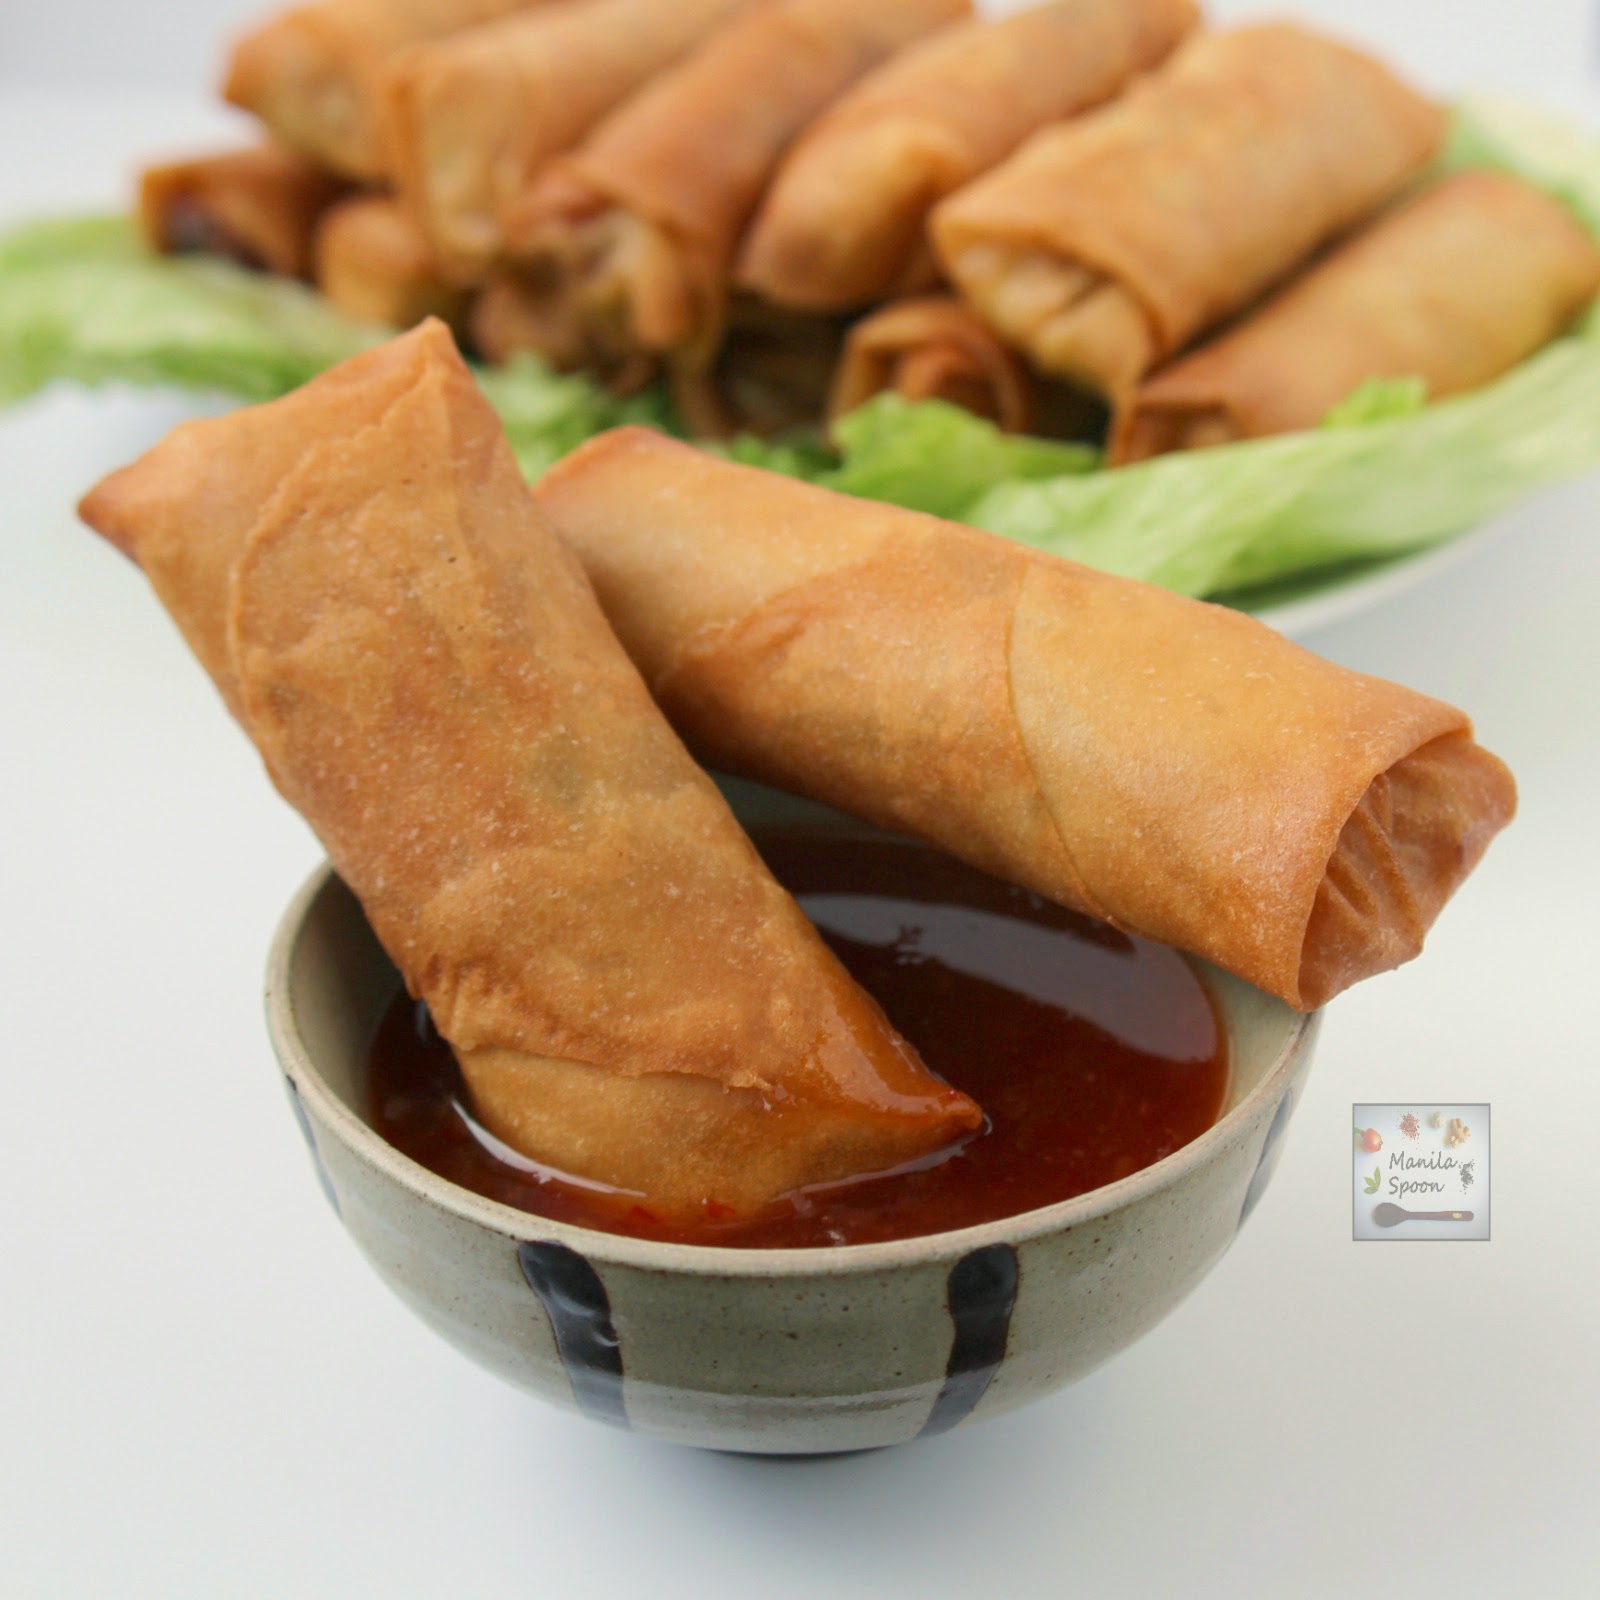 These crunchy and delicious spring rolls (Lumpia) are the perfect appetizers for any party and great for snacking, too. These can be made fully vegetarian or a little meat may be added, too. #easy #lumpia #vegetarian #appetizers #asian 